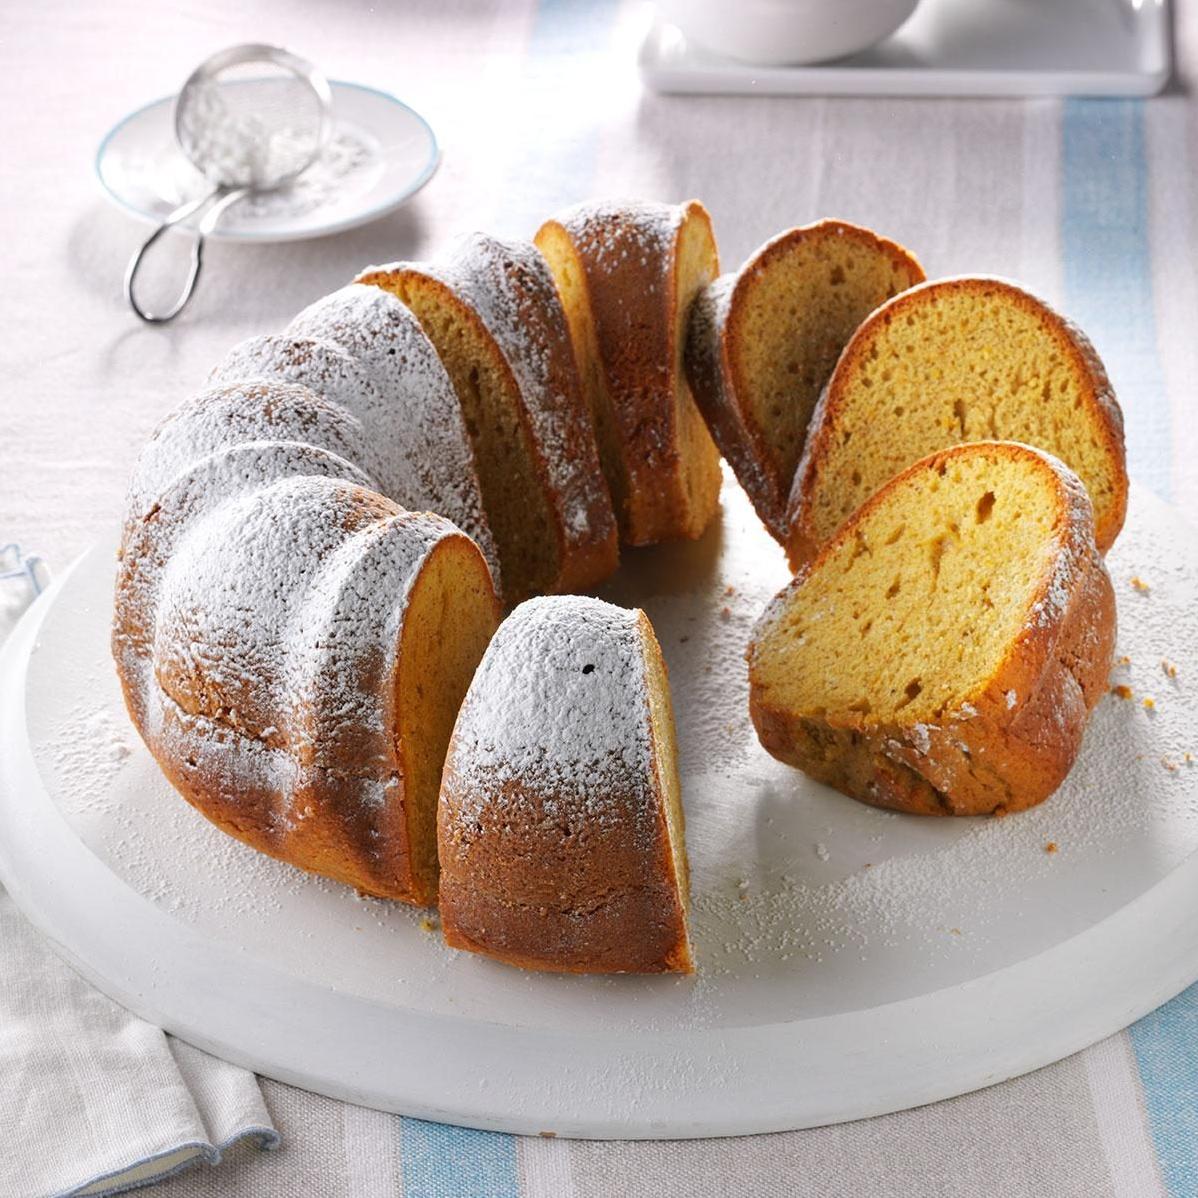  The ultimate afternoon tea treat: Sherry Pound Cake